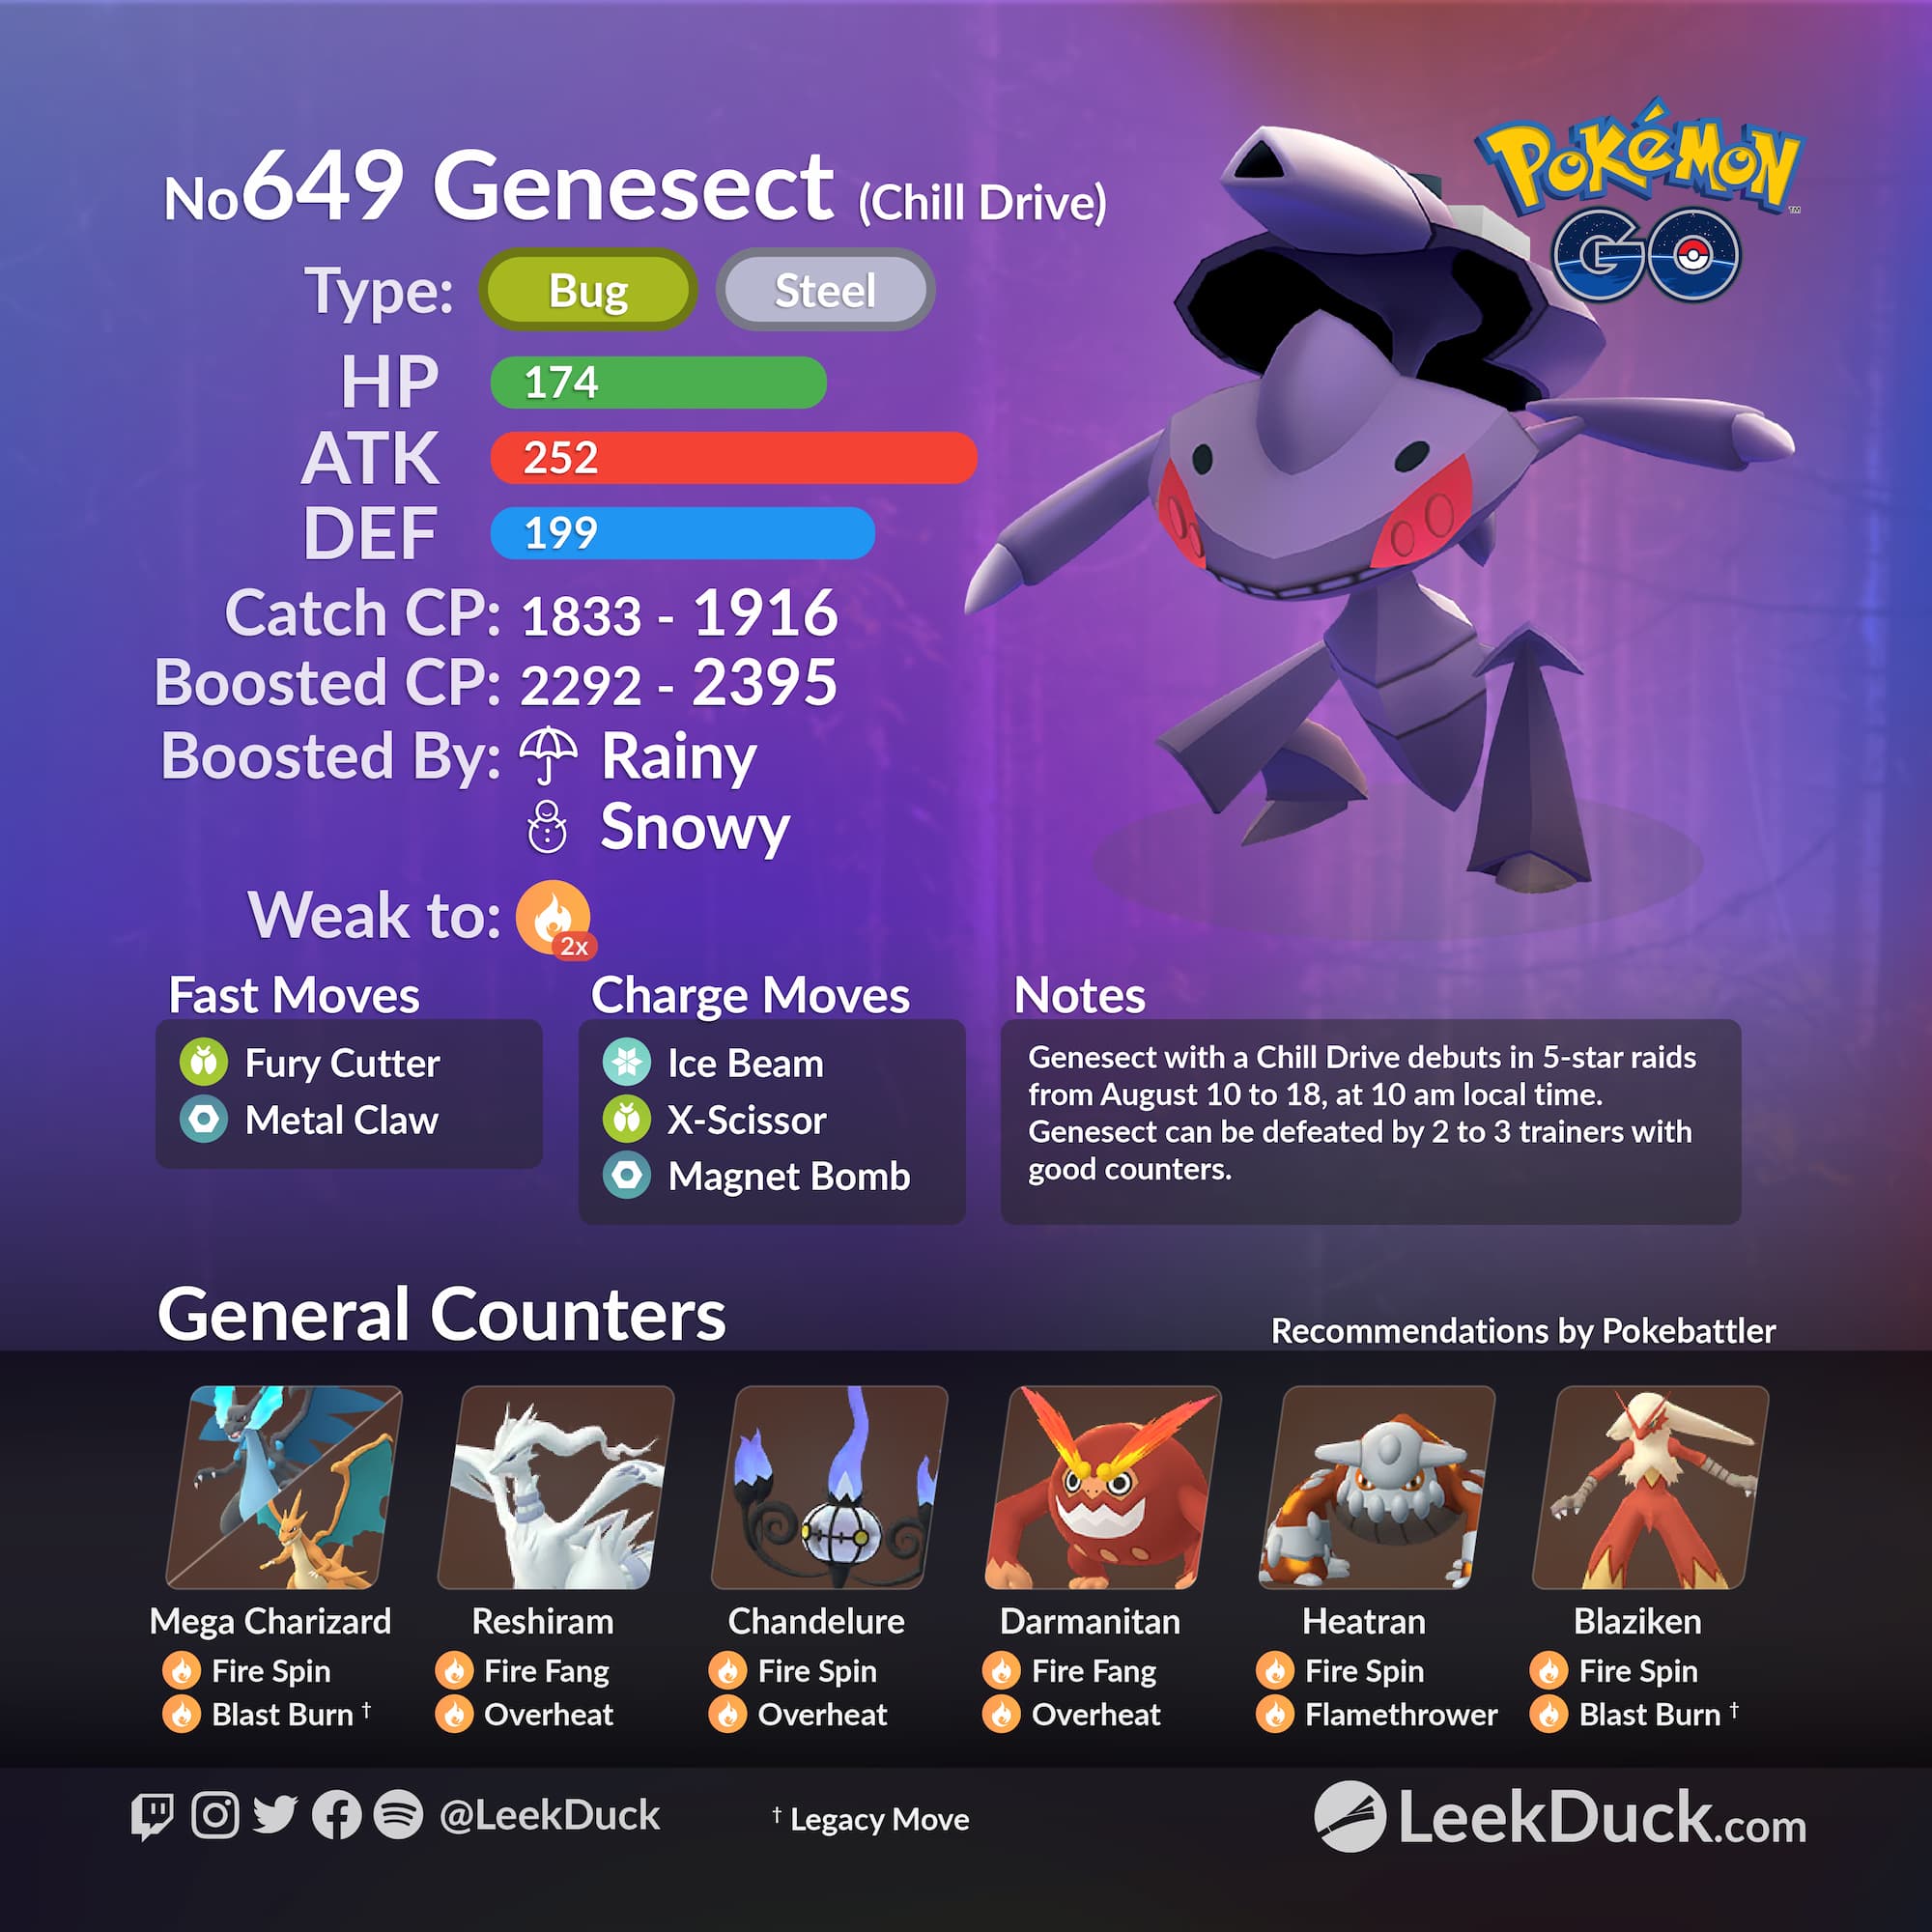 How to solo defeat Douse Drive Genesect in Pokemon GO 5-star raids